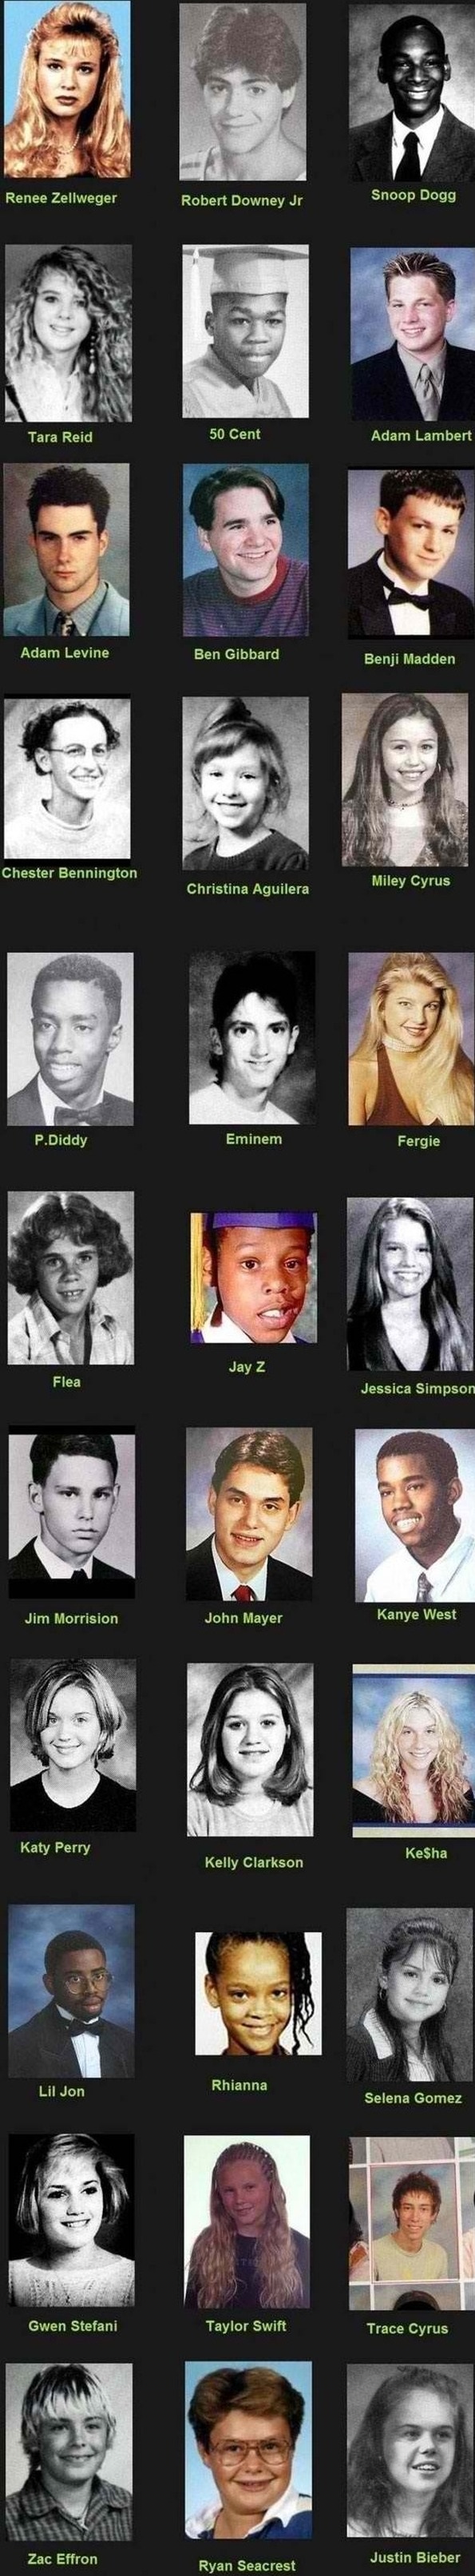 funny-picture-celebs-childhood-photos